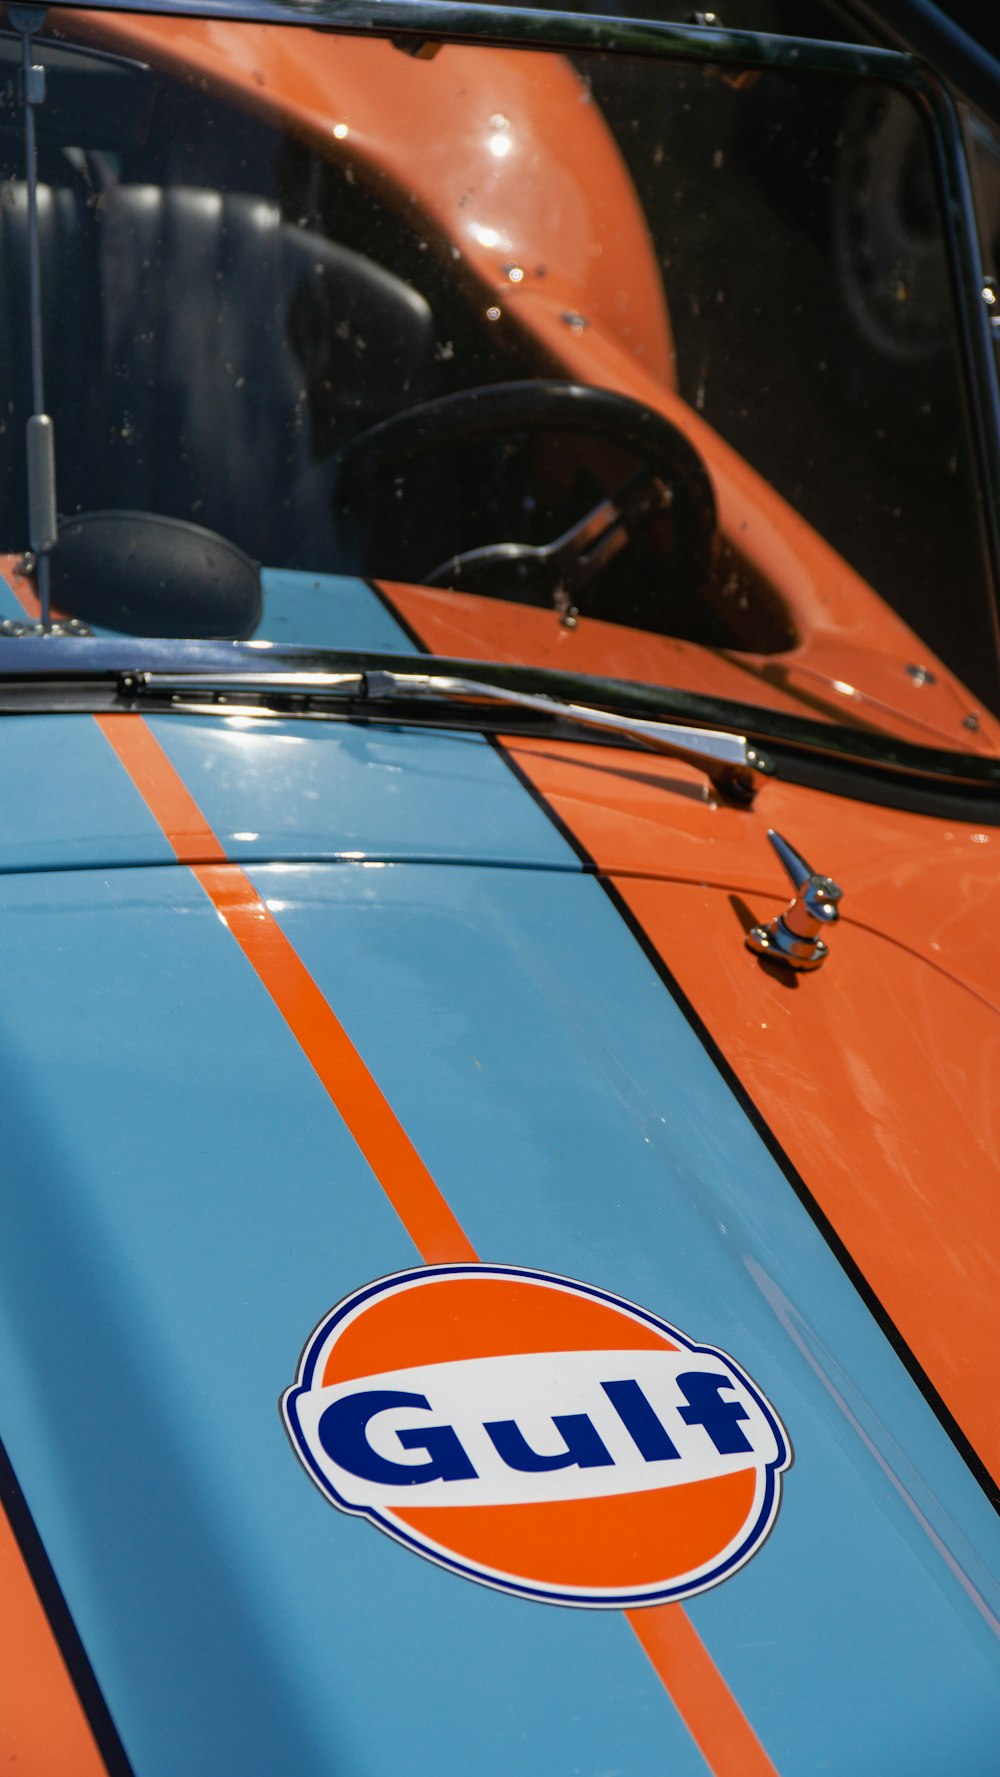 an orange and blue car with the word gulf on it